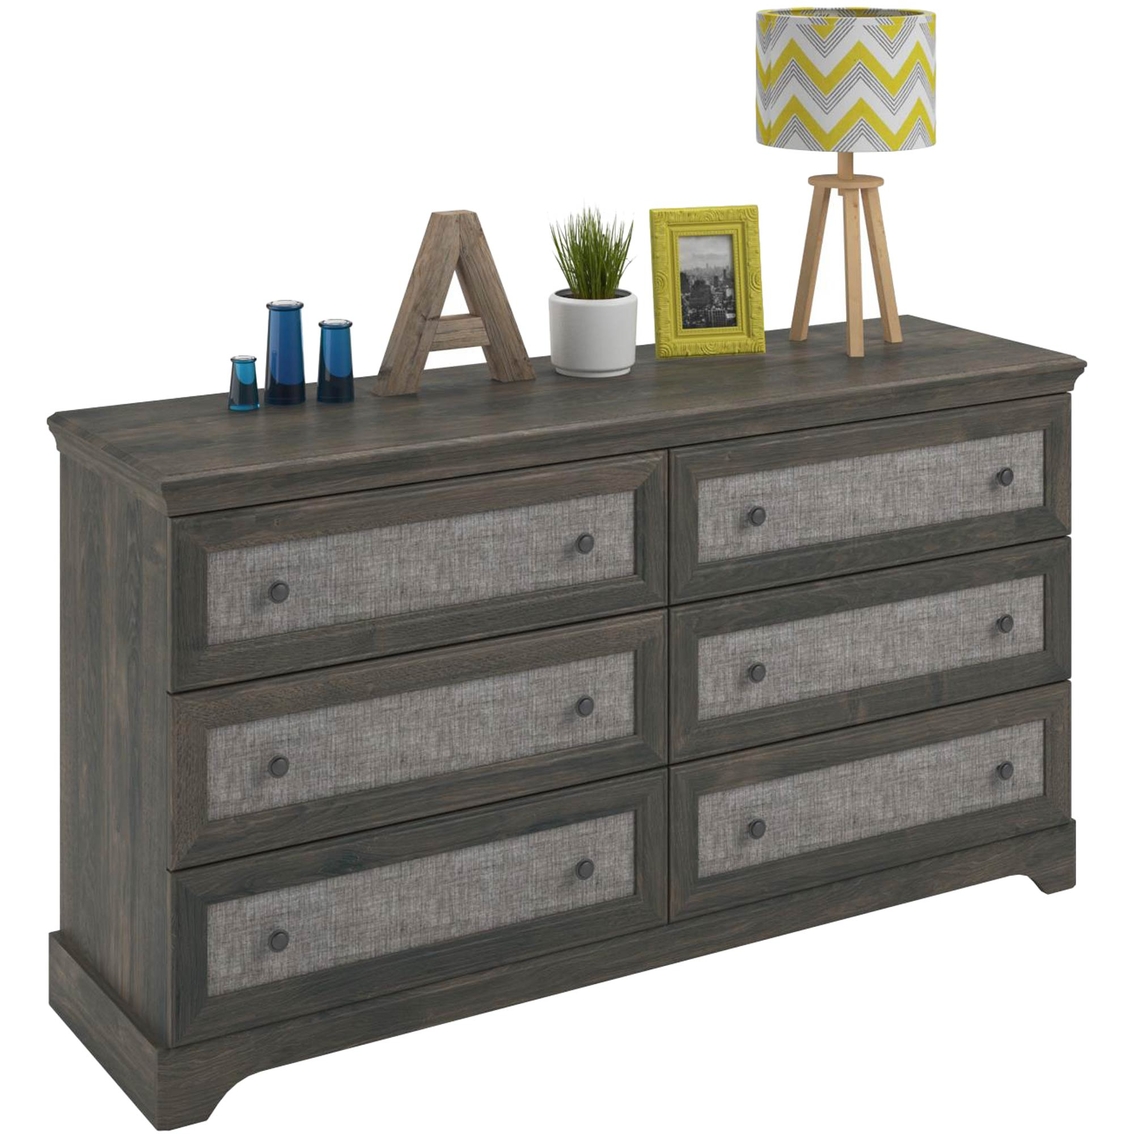 Ameriwood Home Stone River 6 Drawer Dresser with Fabric Inserts Weathered Oak - Image 2 of 4